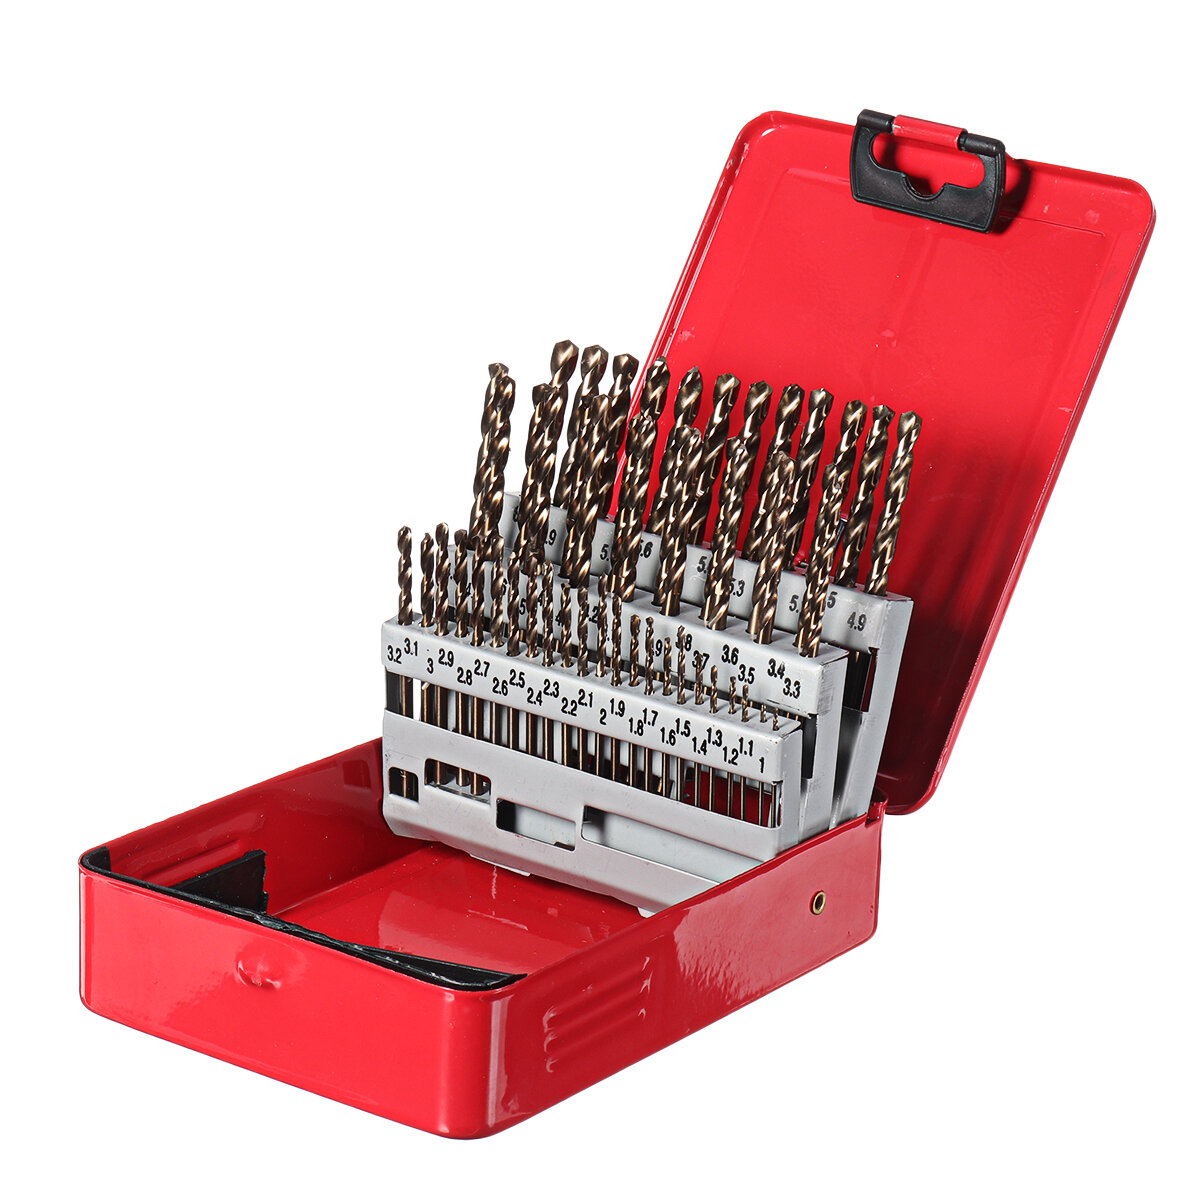 Drillpro 51Pcs 1-6mm M35 Cobalt Drill Bit Set HSS-Co Jobber Length Twist Drill Bits with Metal Case for Stainless Steel